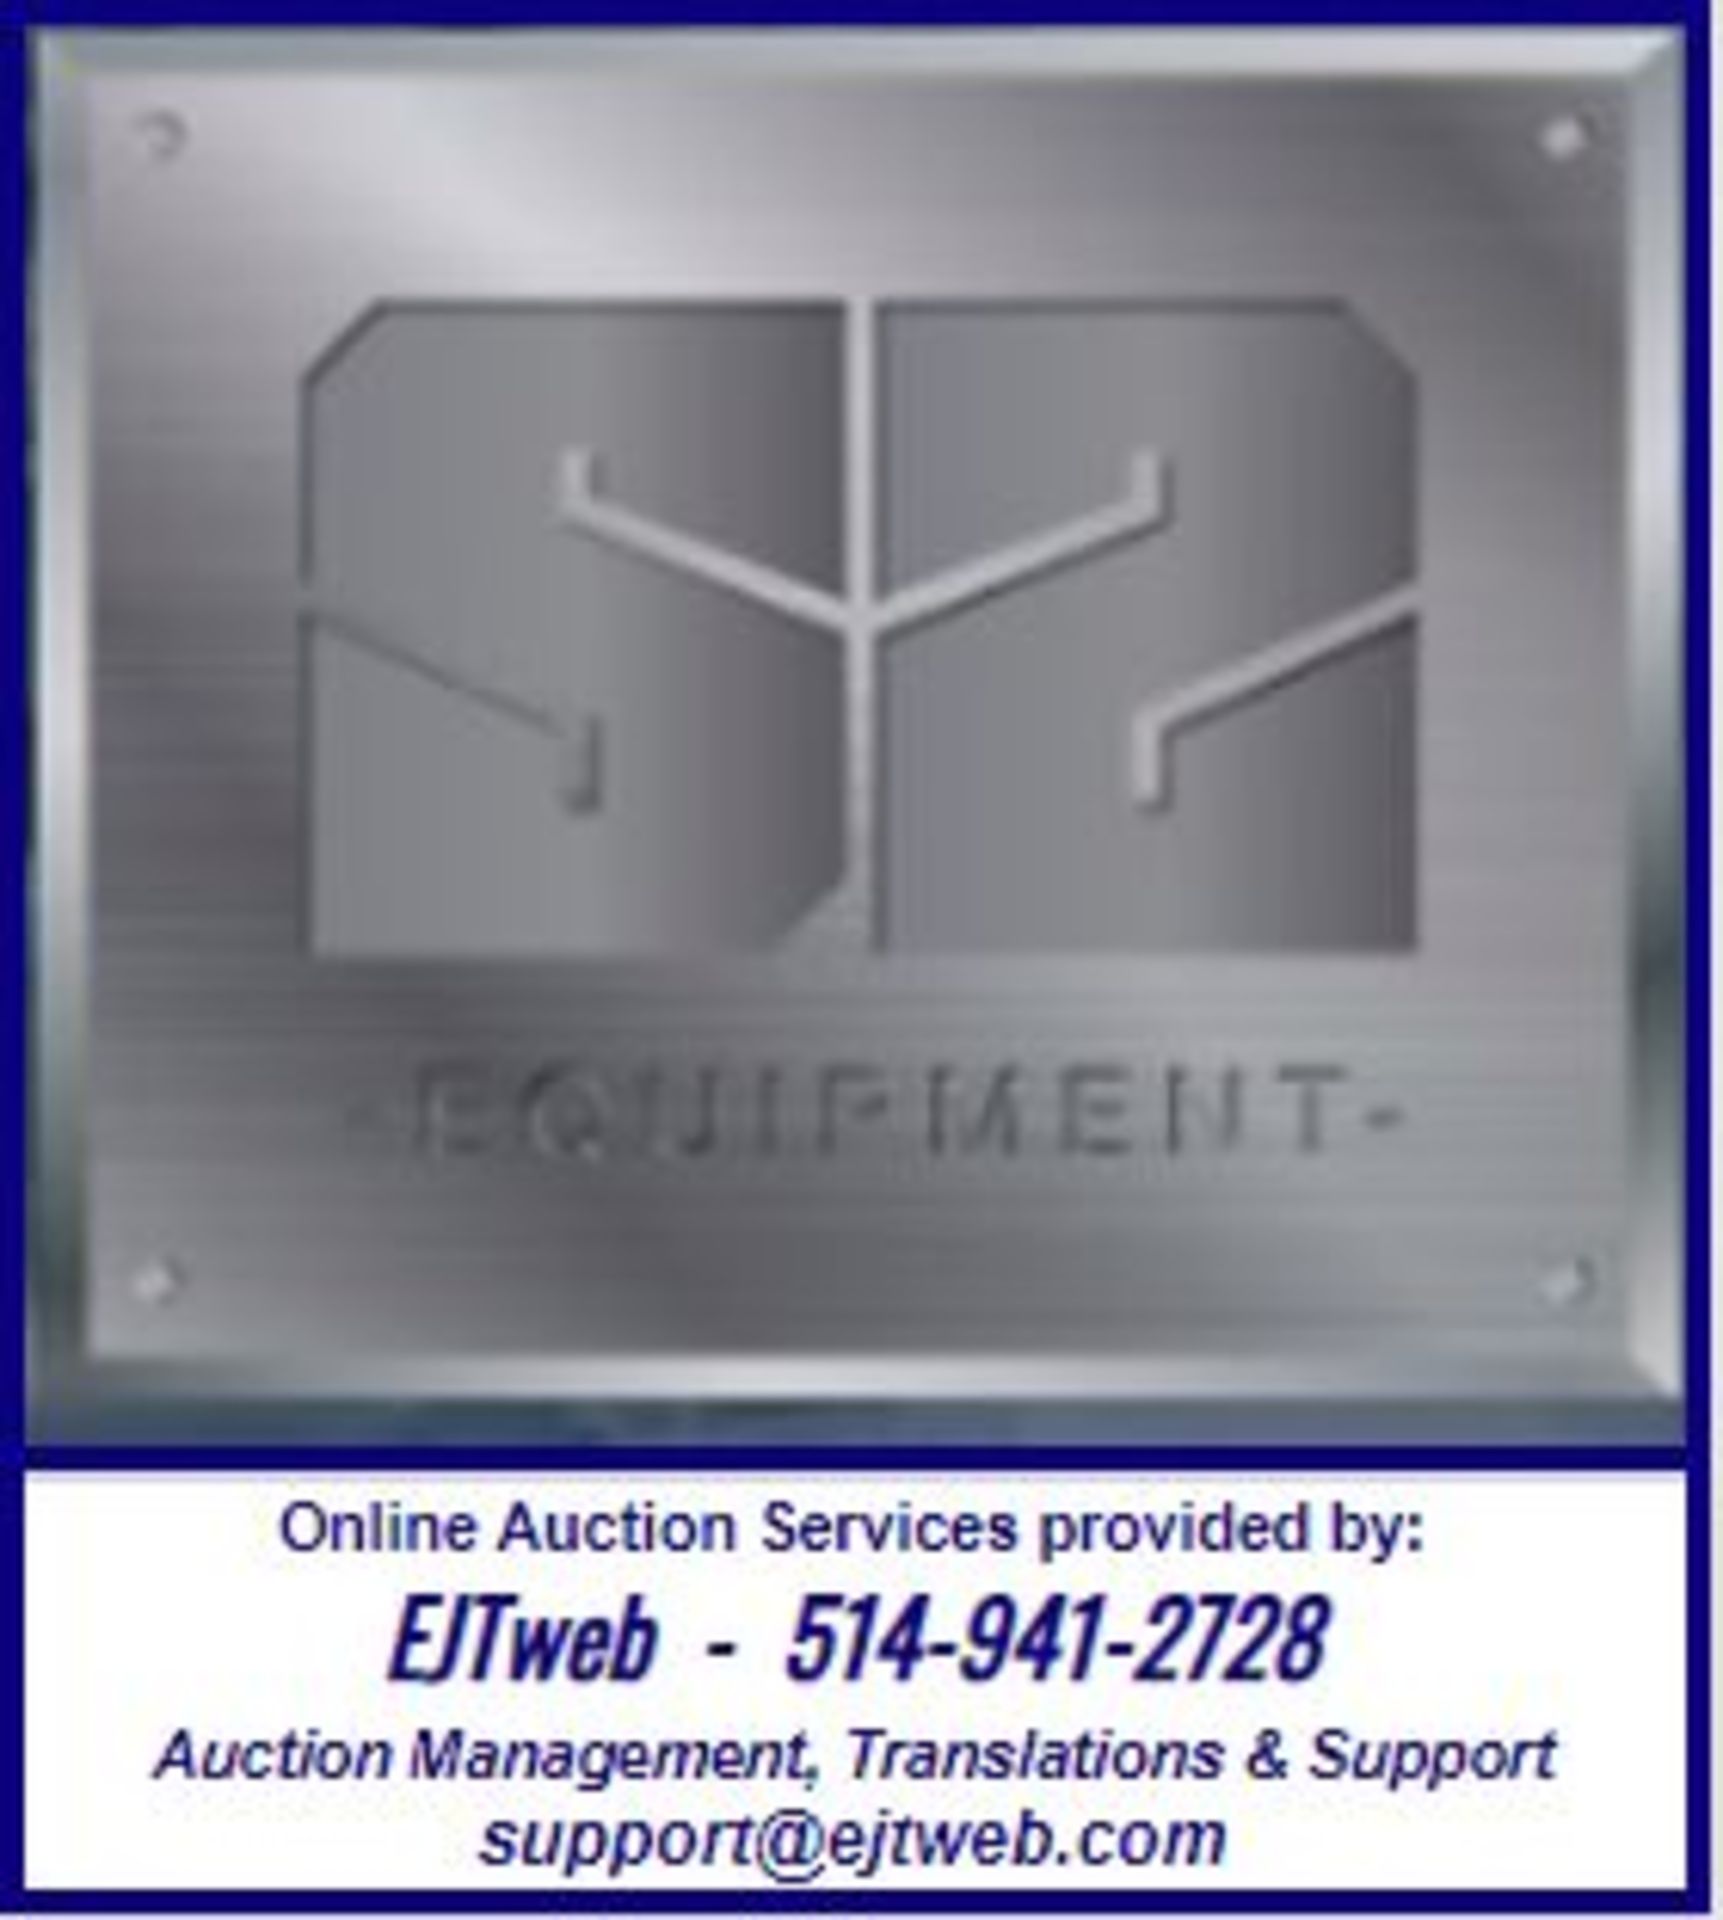 Auction management provided by EJTweb on behalf of S2 Equipment - support@ejtweb.com 514-941-2728